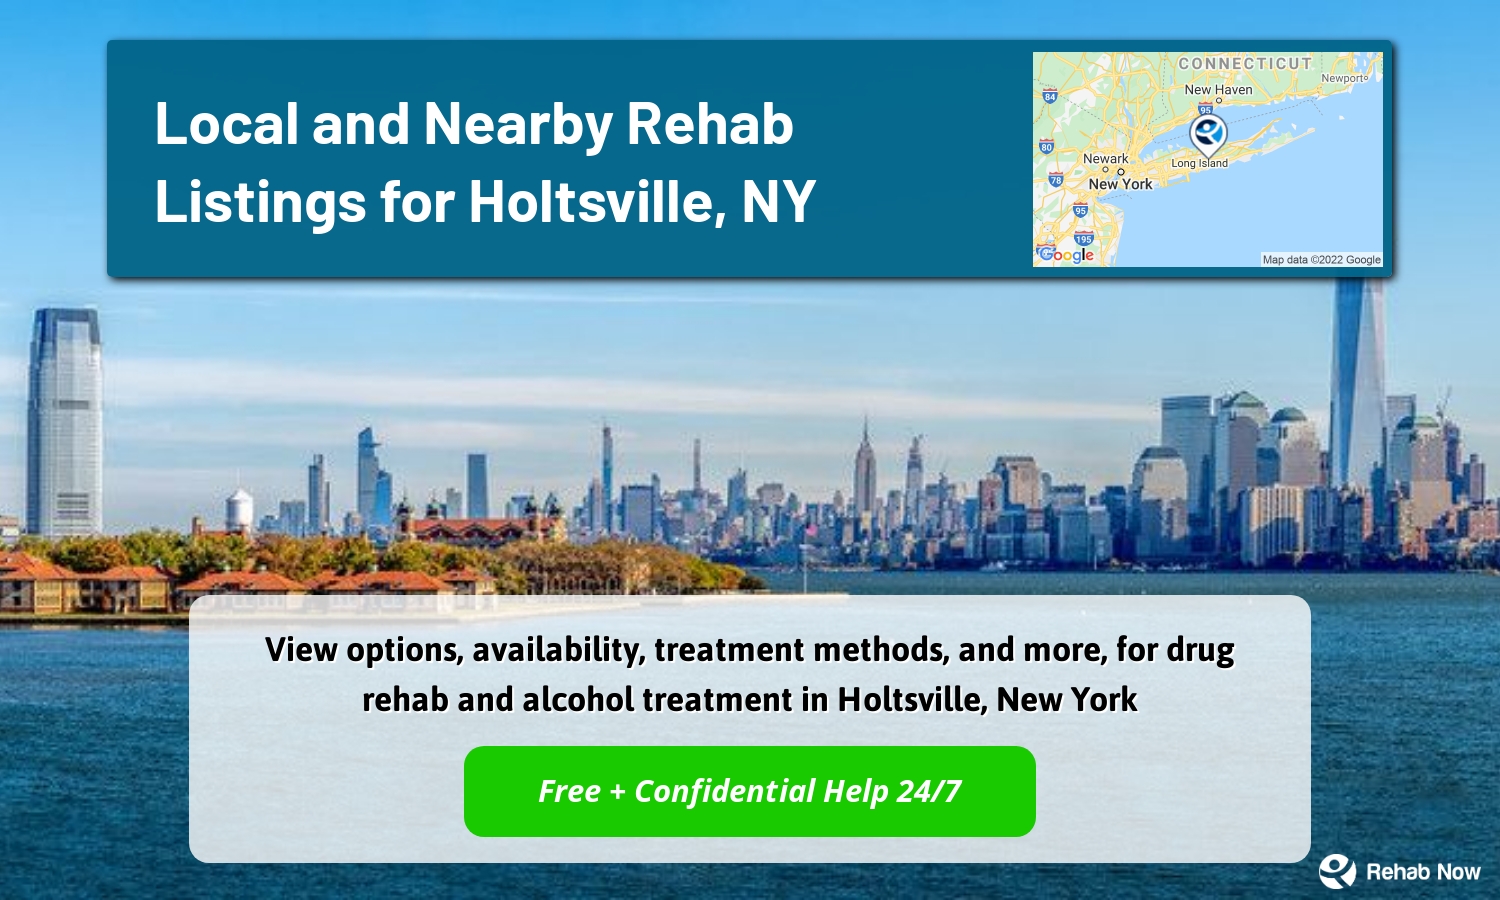 View options, availability, treatment methods, and more, for drug rehab and alcohol treatment in Holtsville, New York